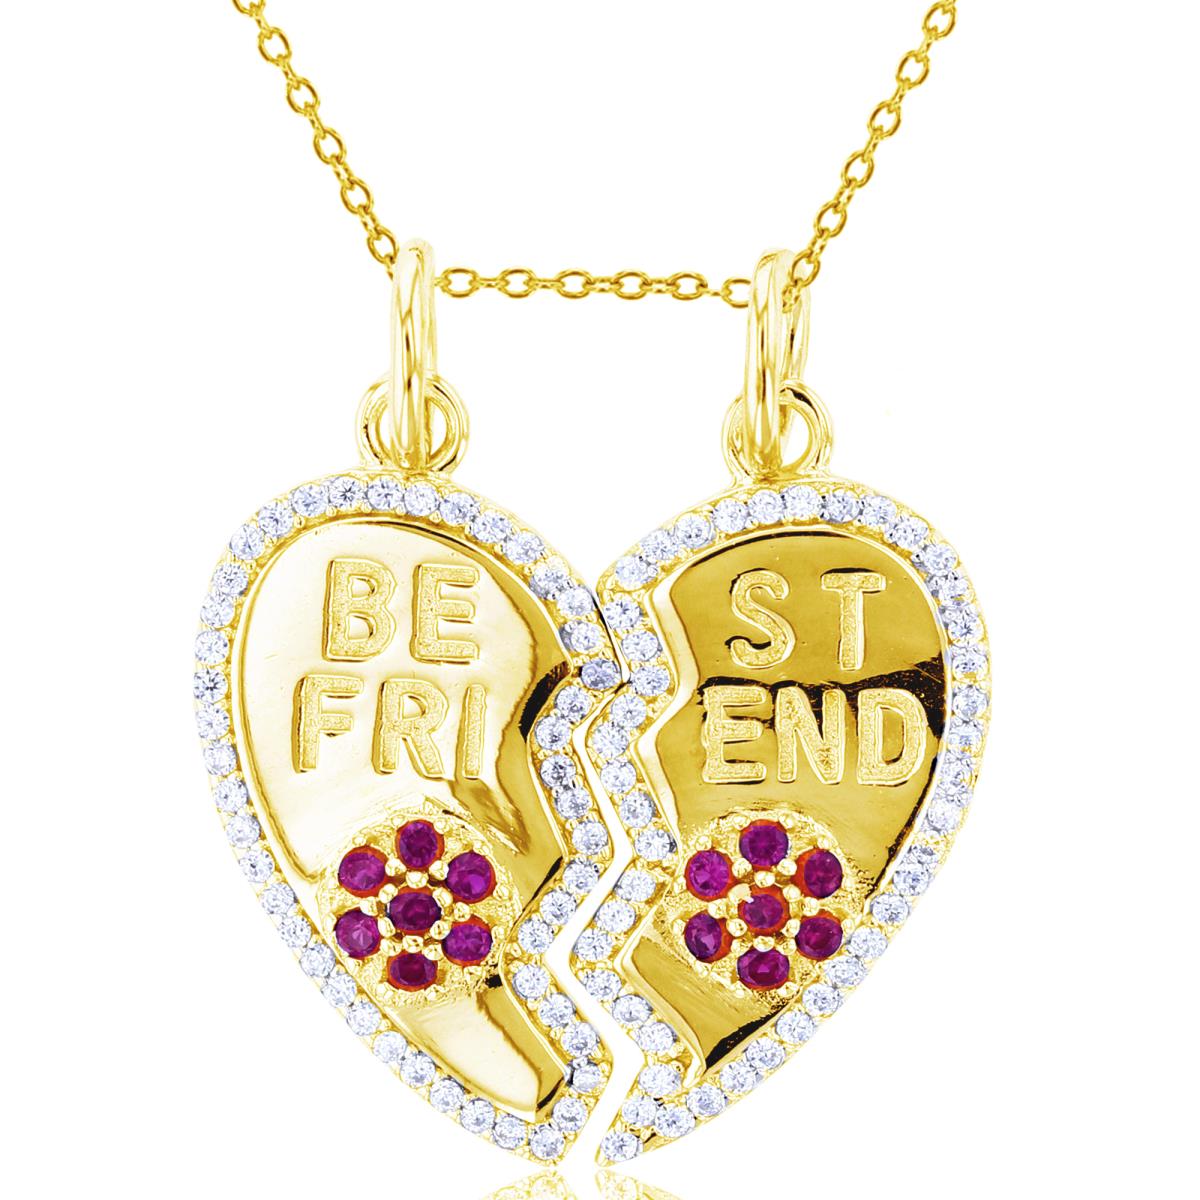 Sterling Silver +1Micron Yellow Gold Rnd White & #8 Ruby CZ "Be Friend" Divided Heart 18"Necklace